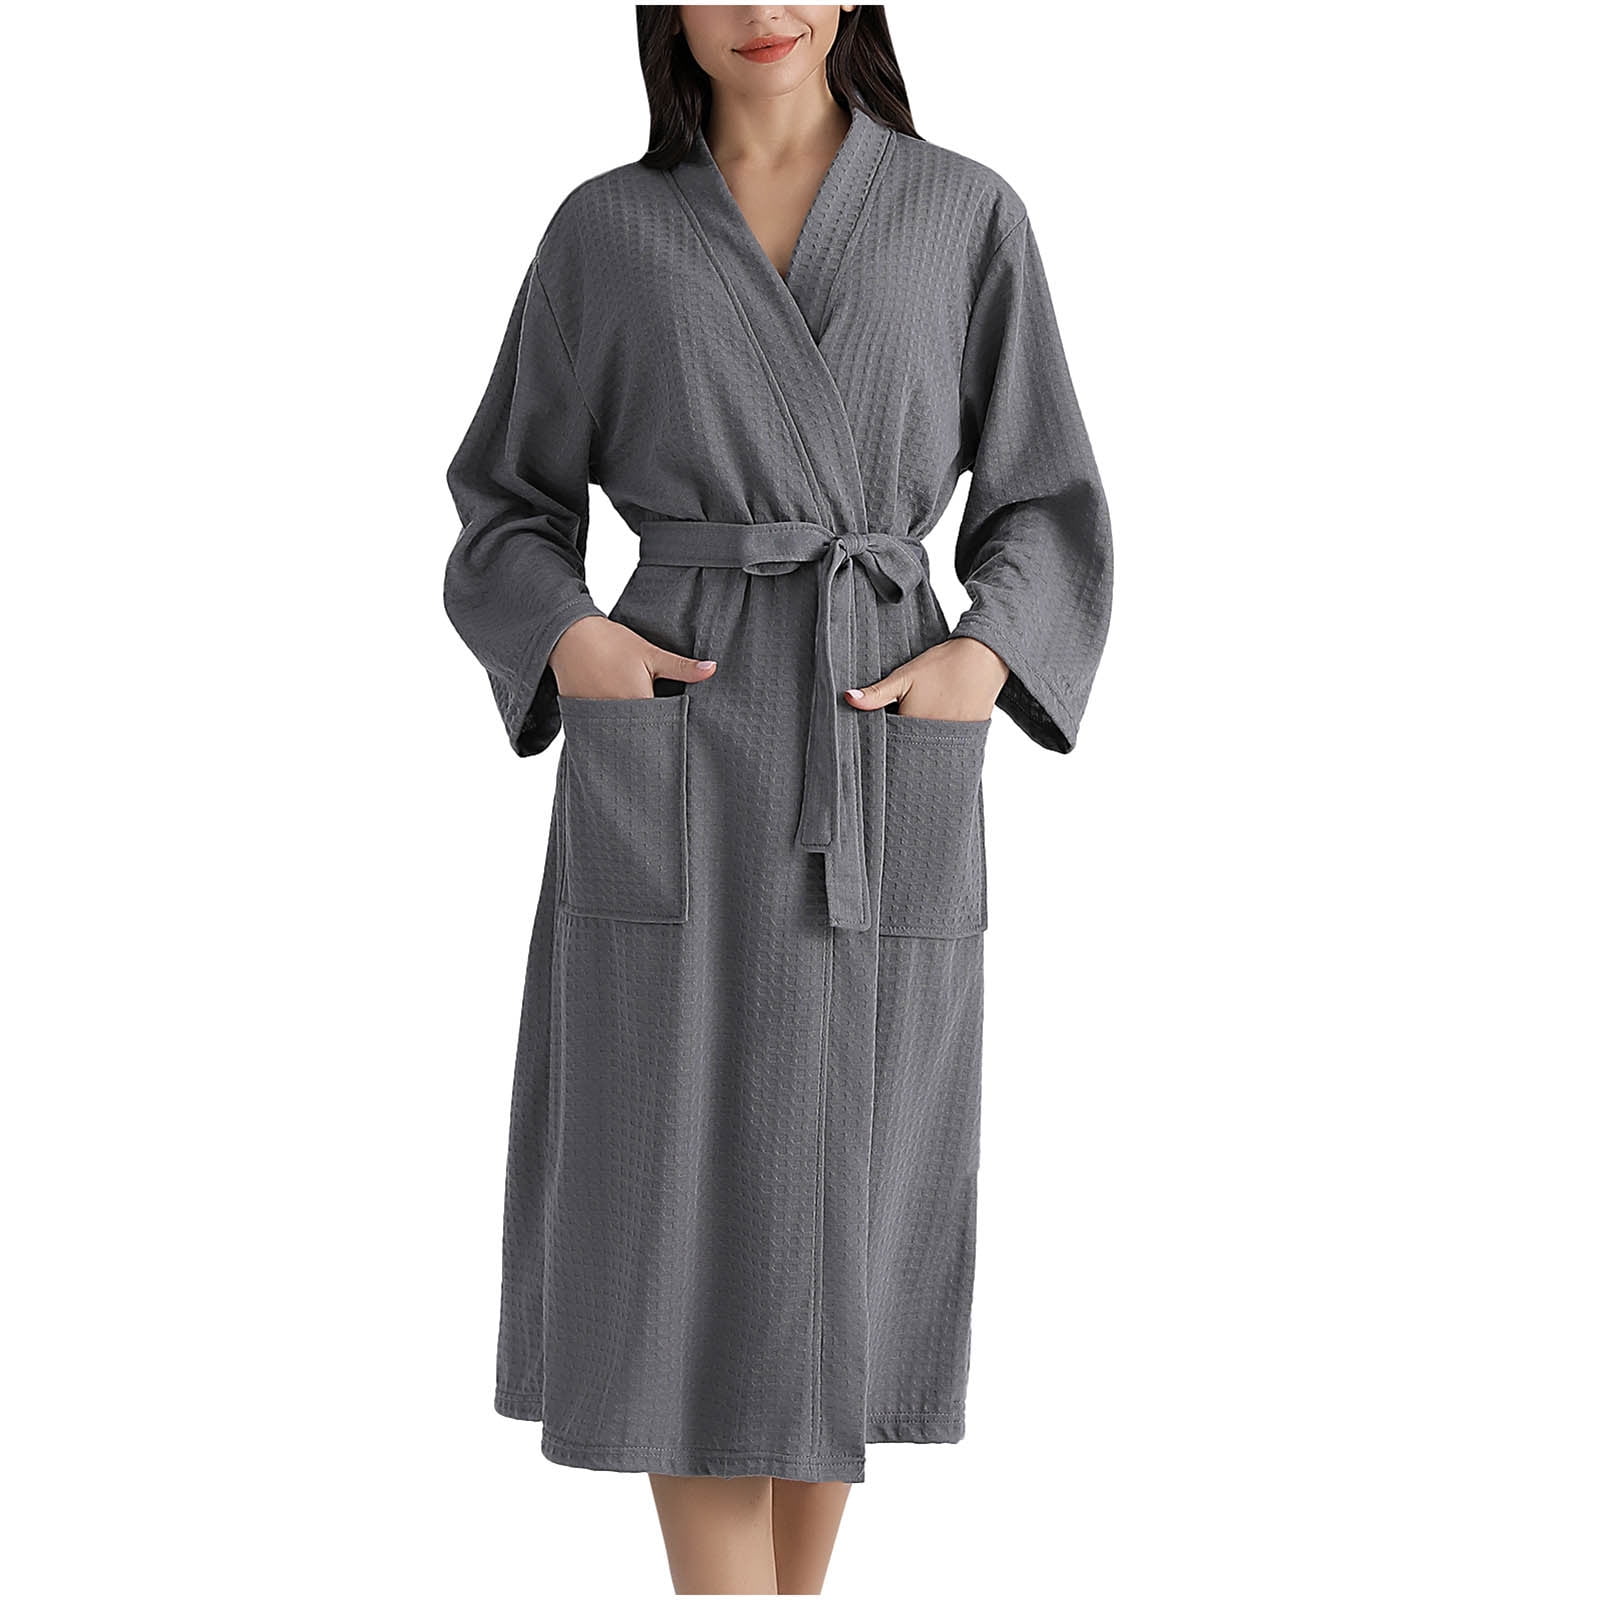 Ladies Snuggle Dressing Gown Robes Extra Long Super Soft Cuddly Bathrobe  Gowns | eBay